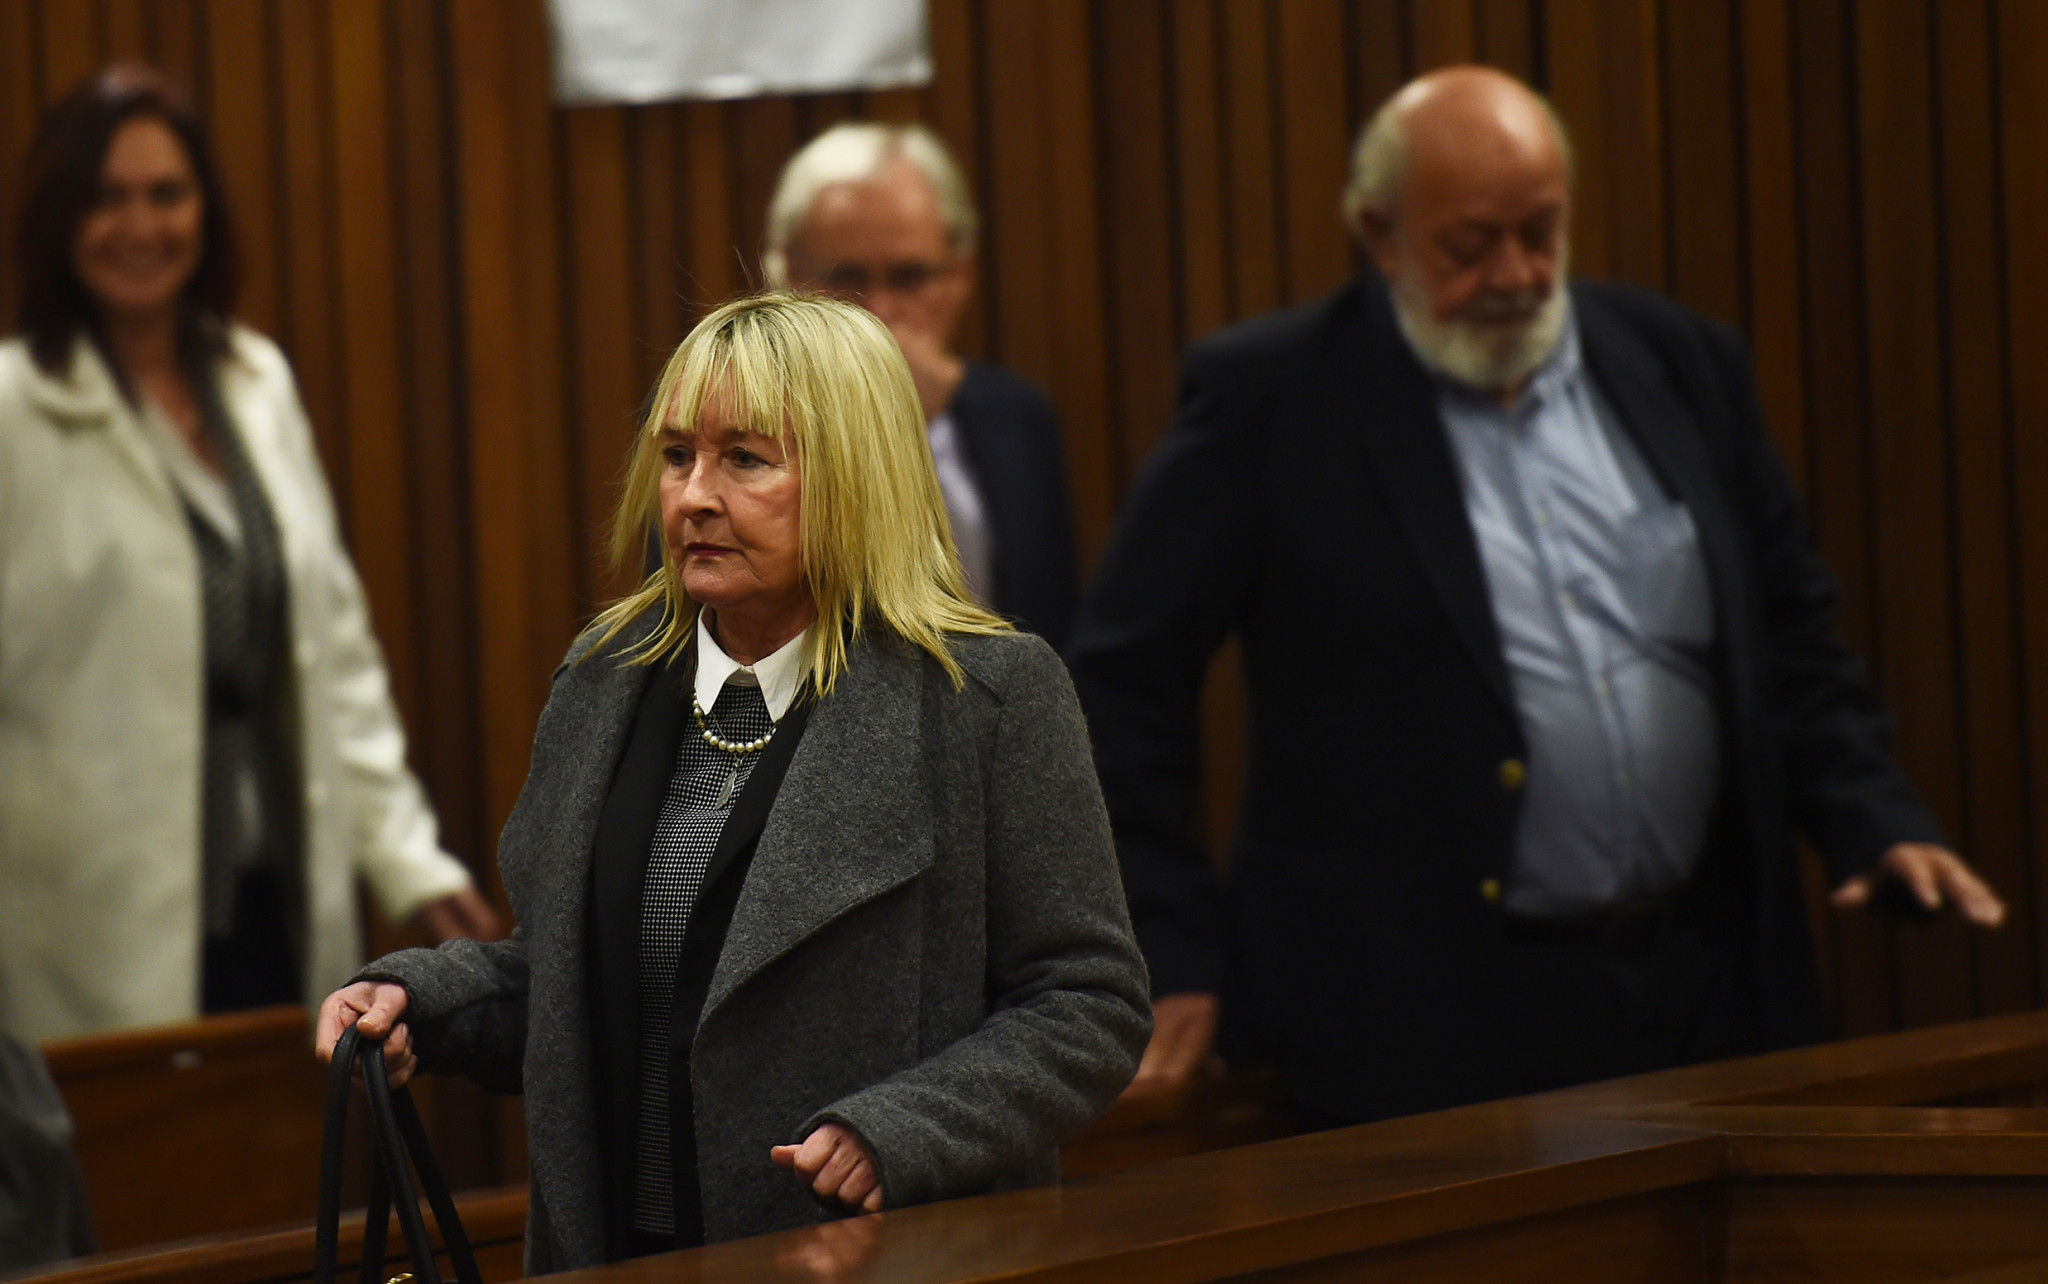 June Steenkamp said she "shook with anger" at the BBC trailer for a documentary on Oscar Pistorius ©Getty Images